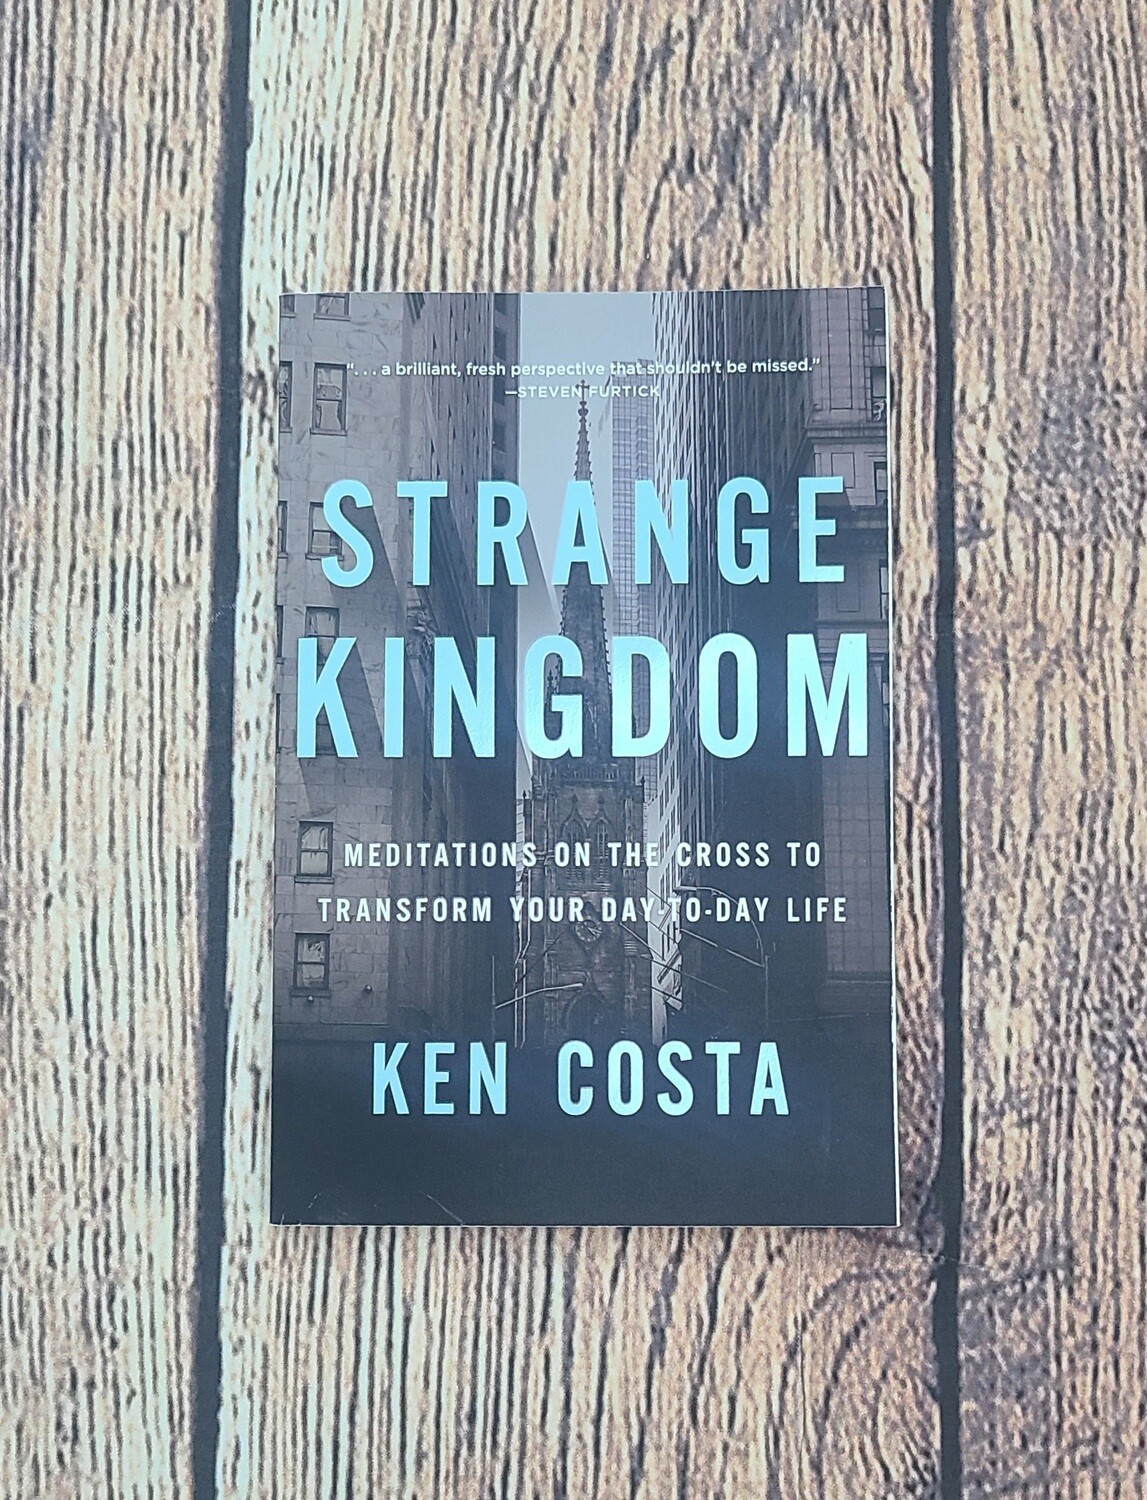 Strange Kingdom: Meditations on the Cross to Transform Your Day-To-Day Life by Ken Costa